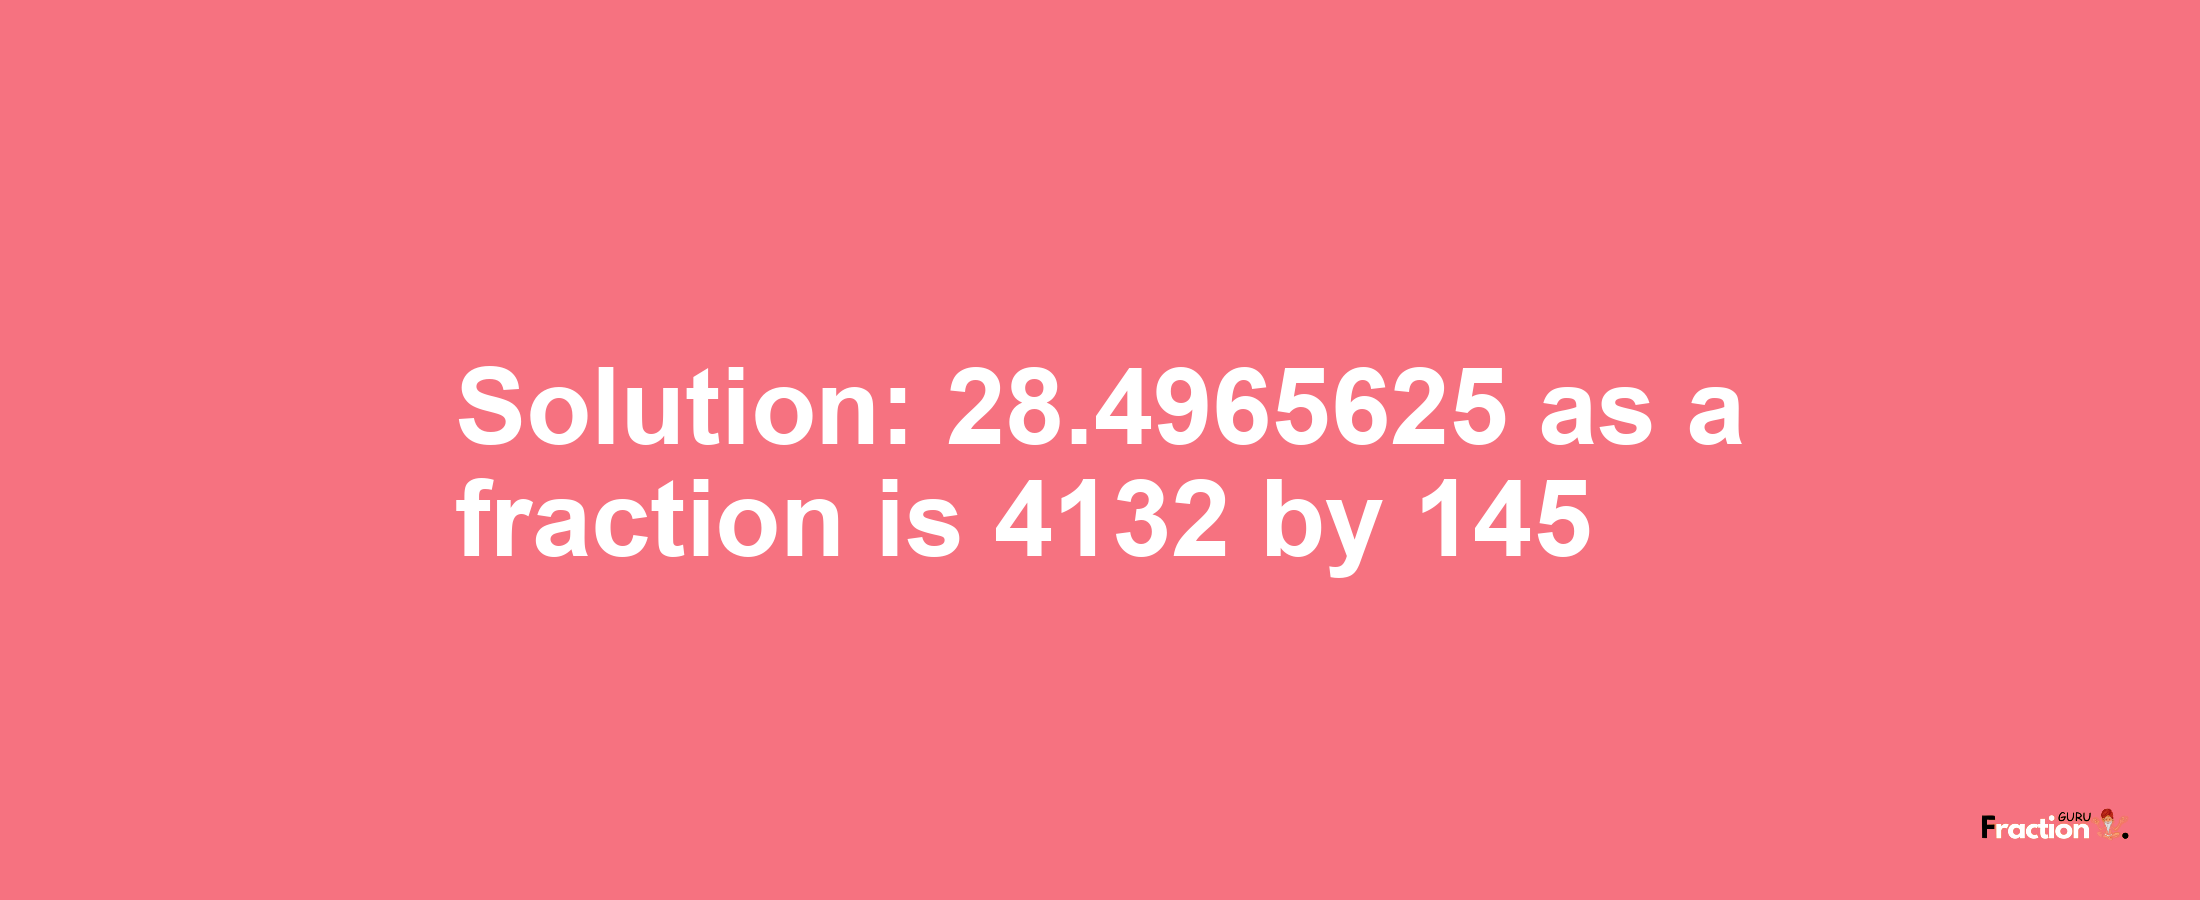 Solution:28.4965625 as a fraction is 4132/145